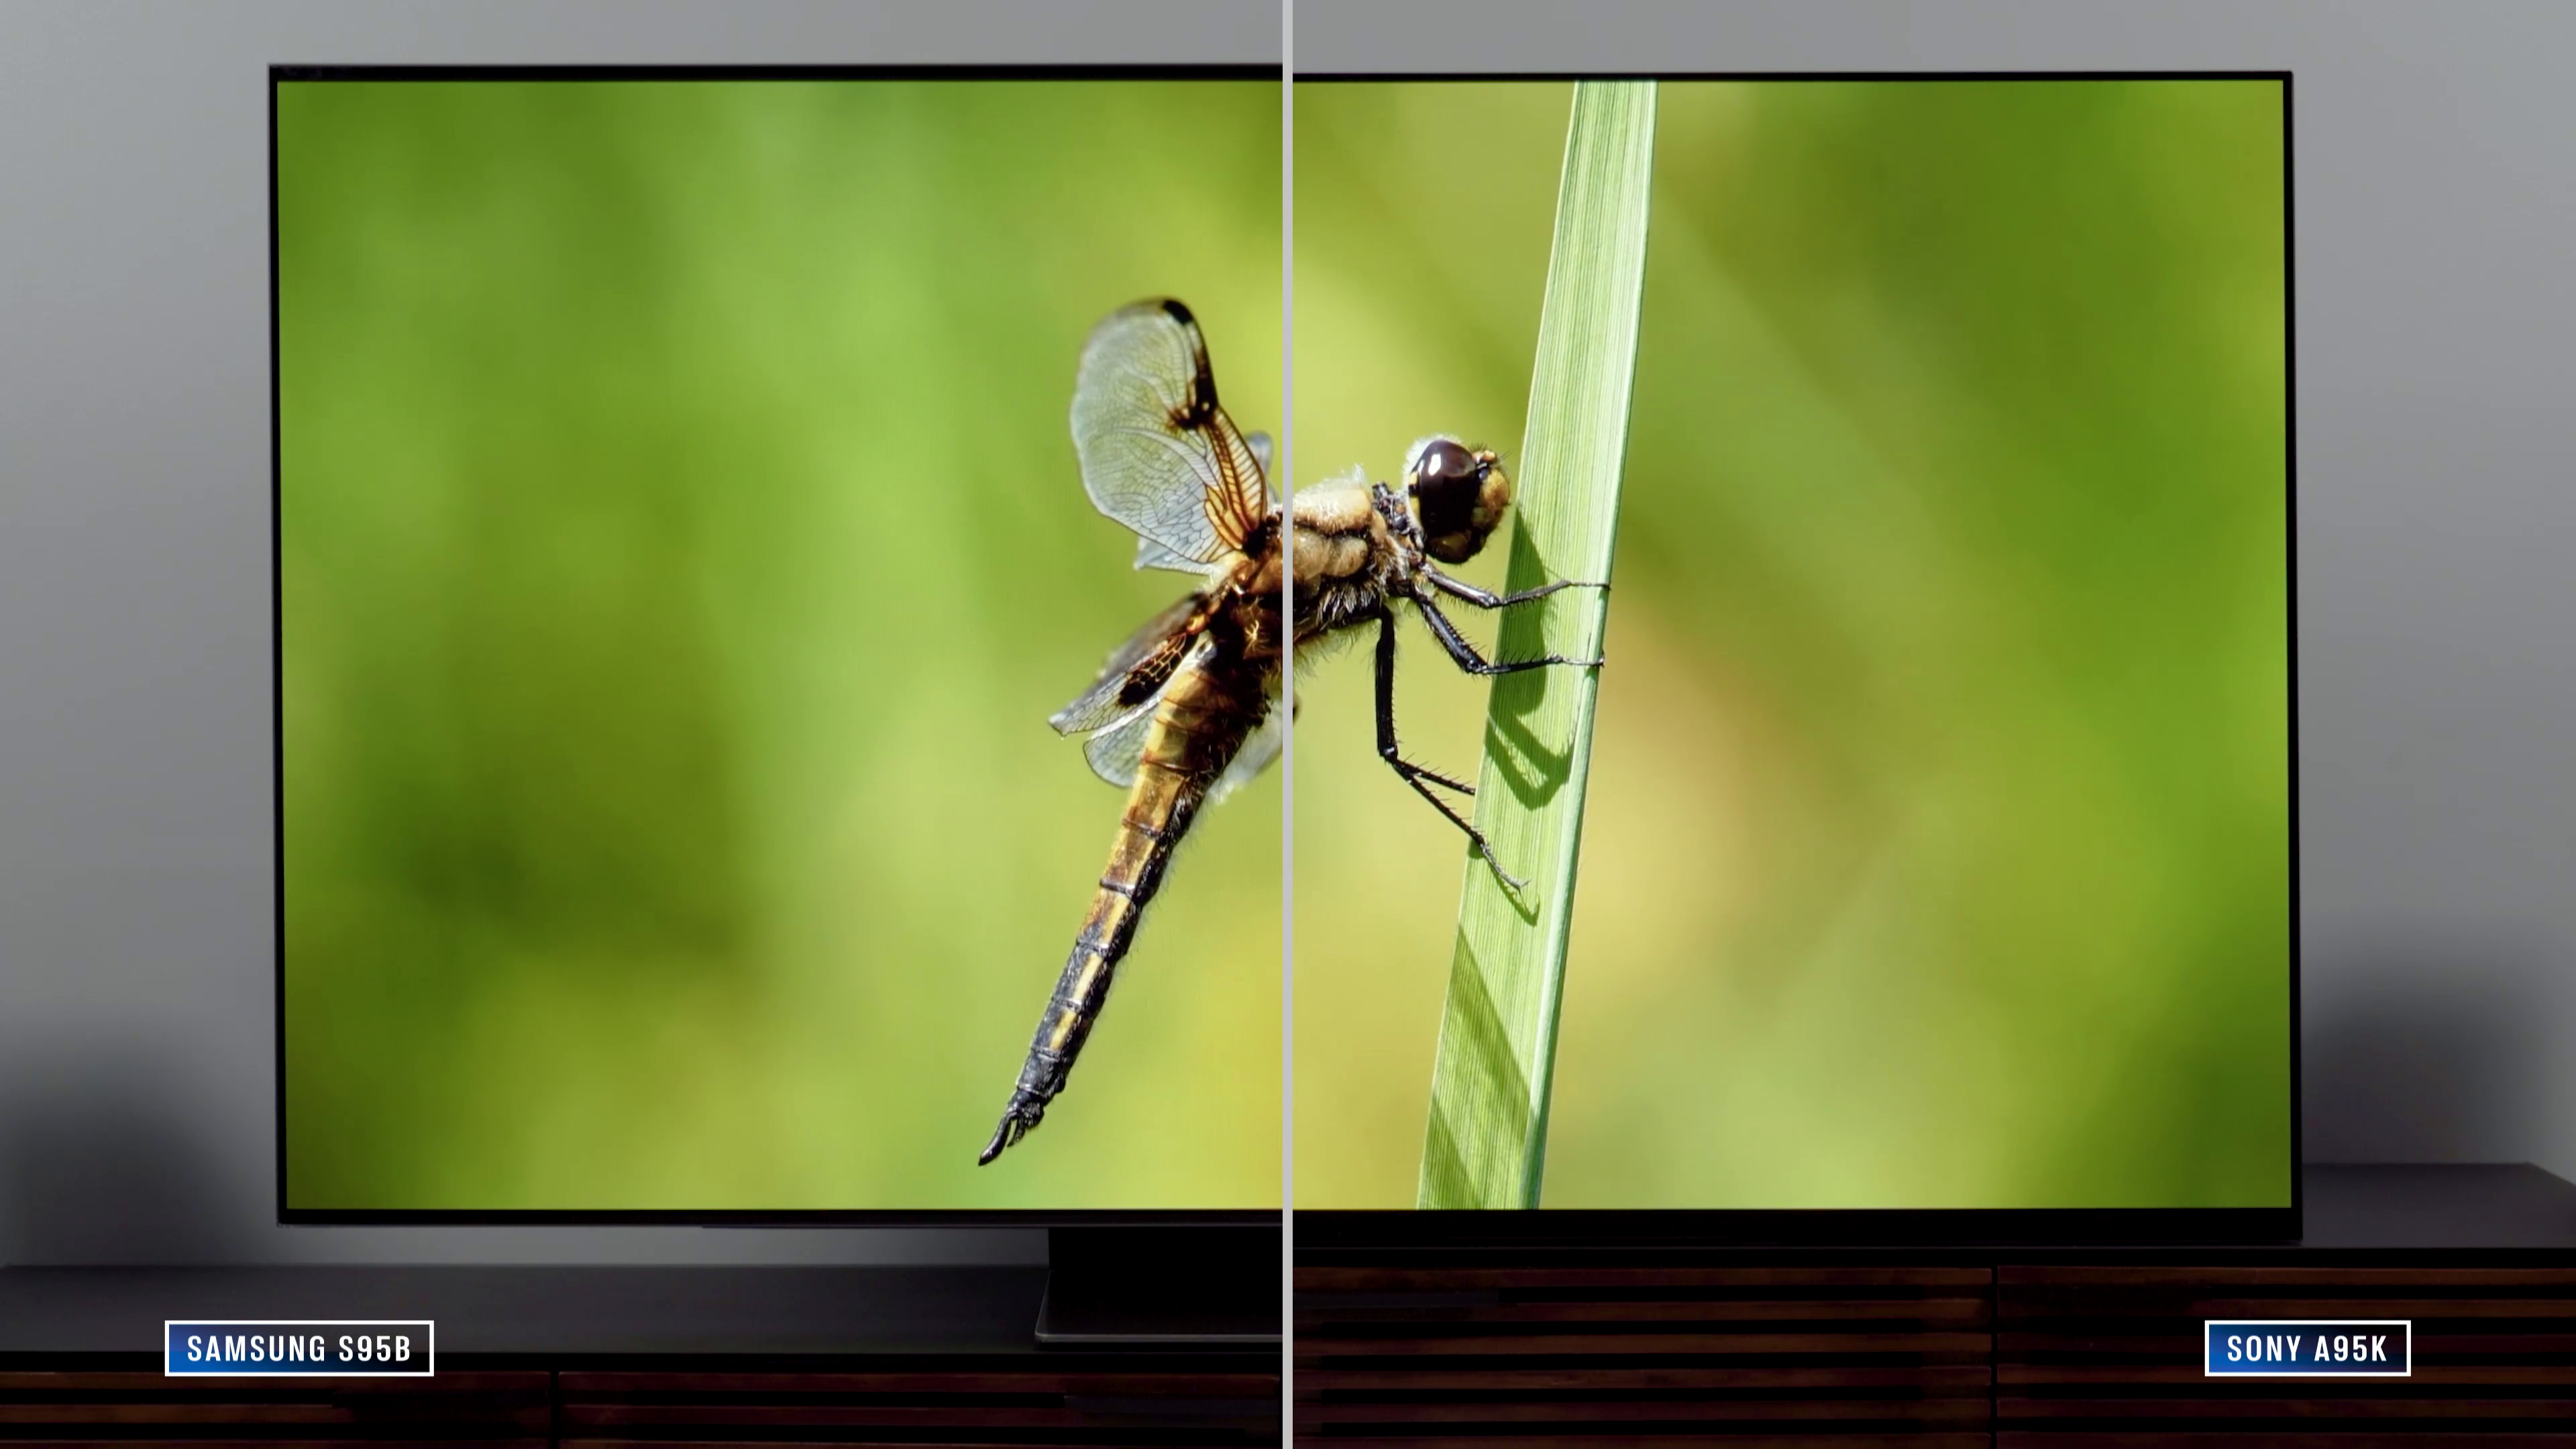 Split screen showing color and brightness differences between two tvs, a green dragonfly on screen